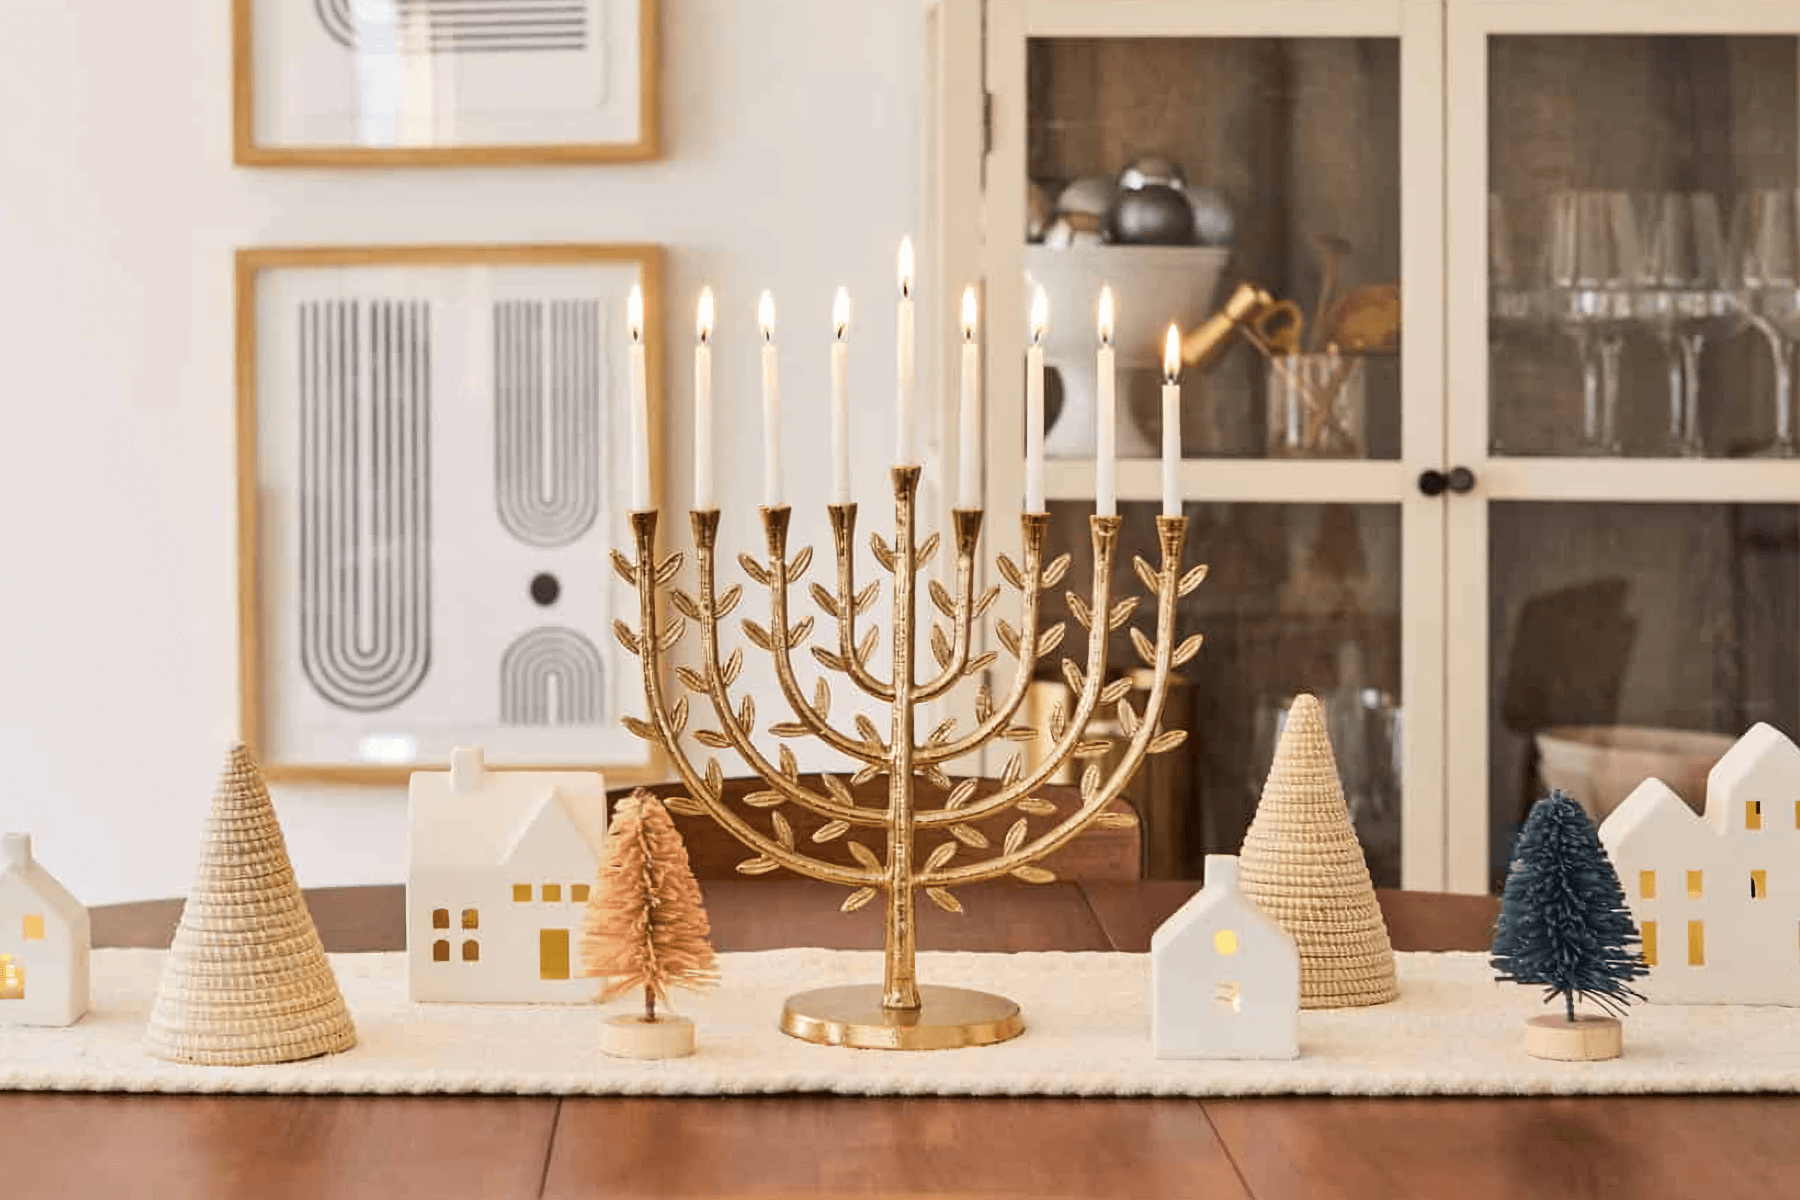 A gold Chanukkiah with leaf details is lit for the 8th night of Hanukkah on a table with winter-themed ornaments.